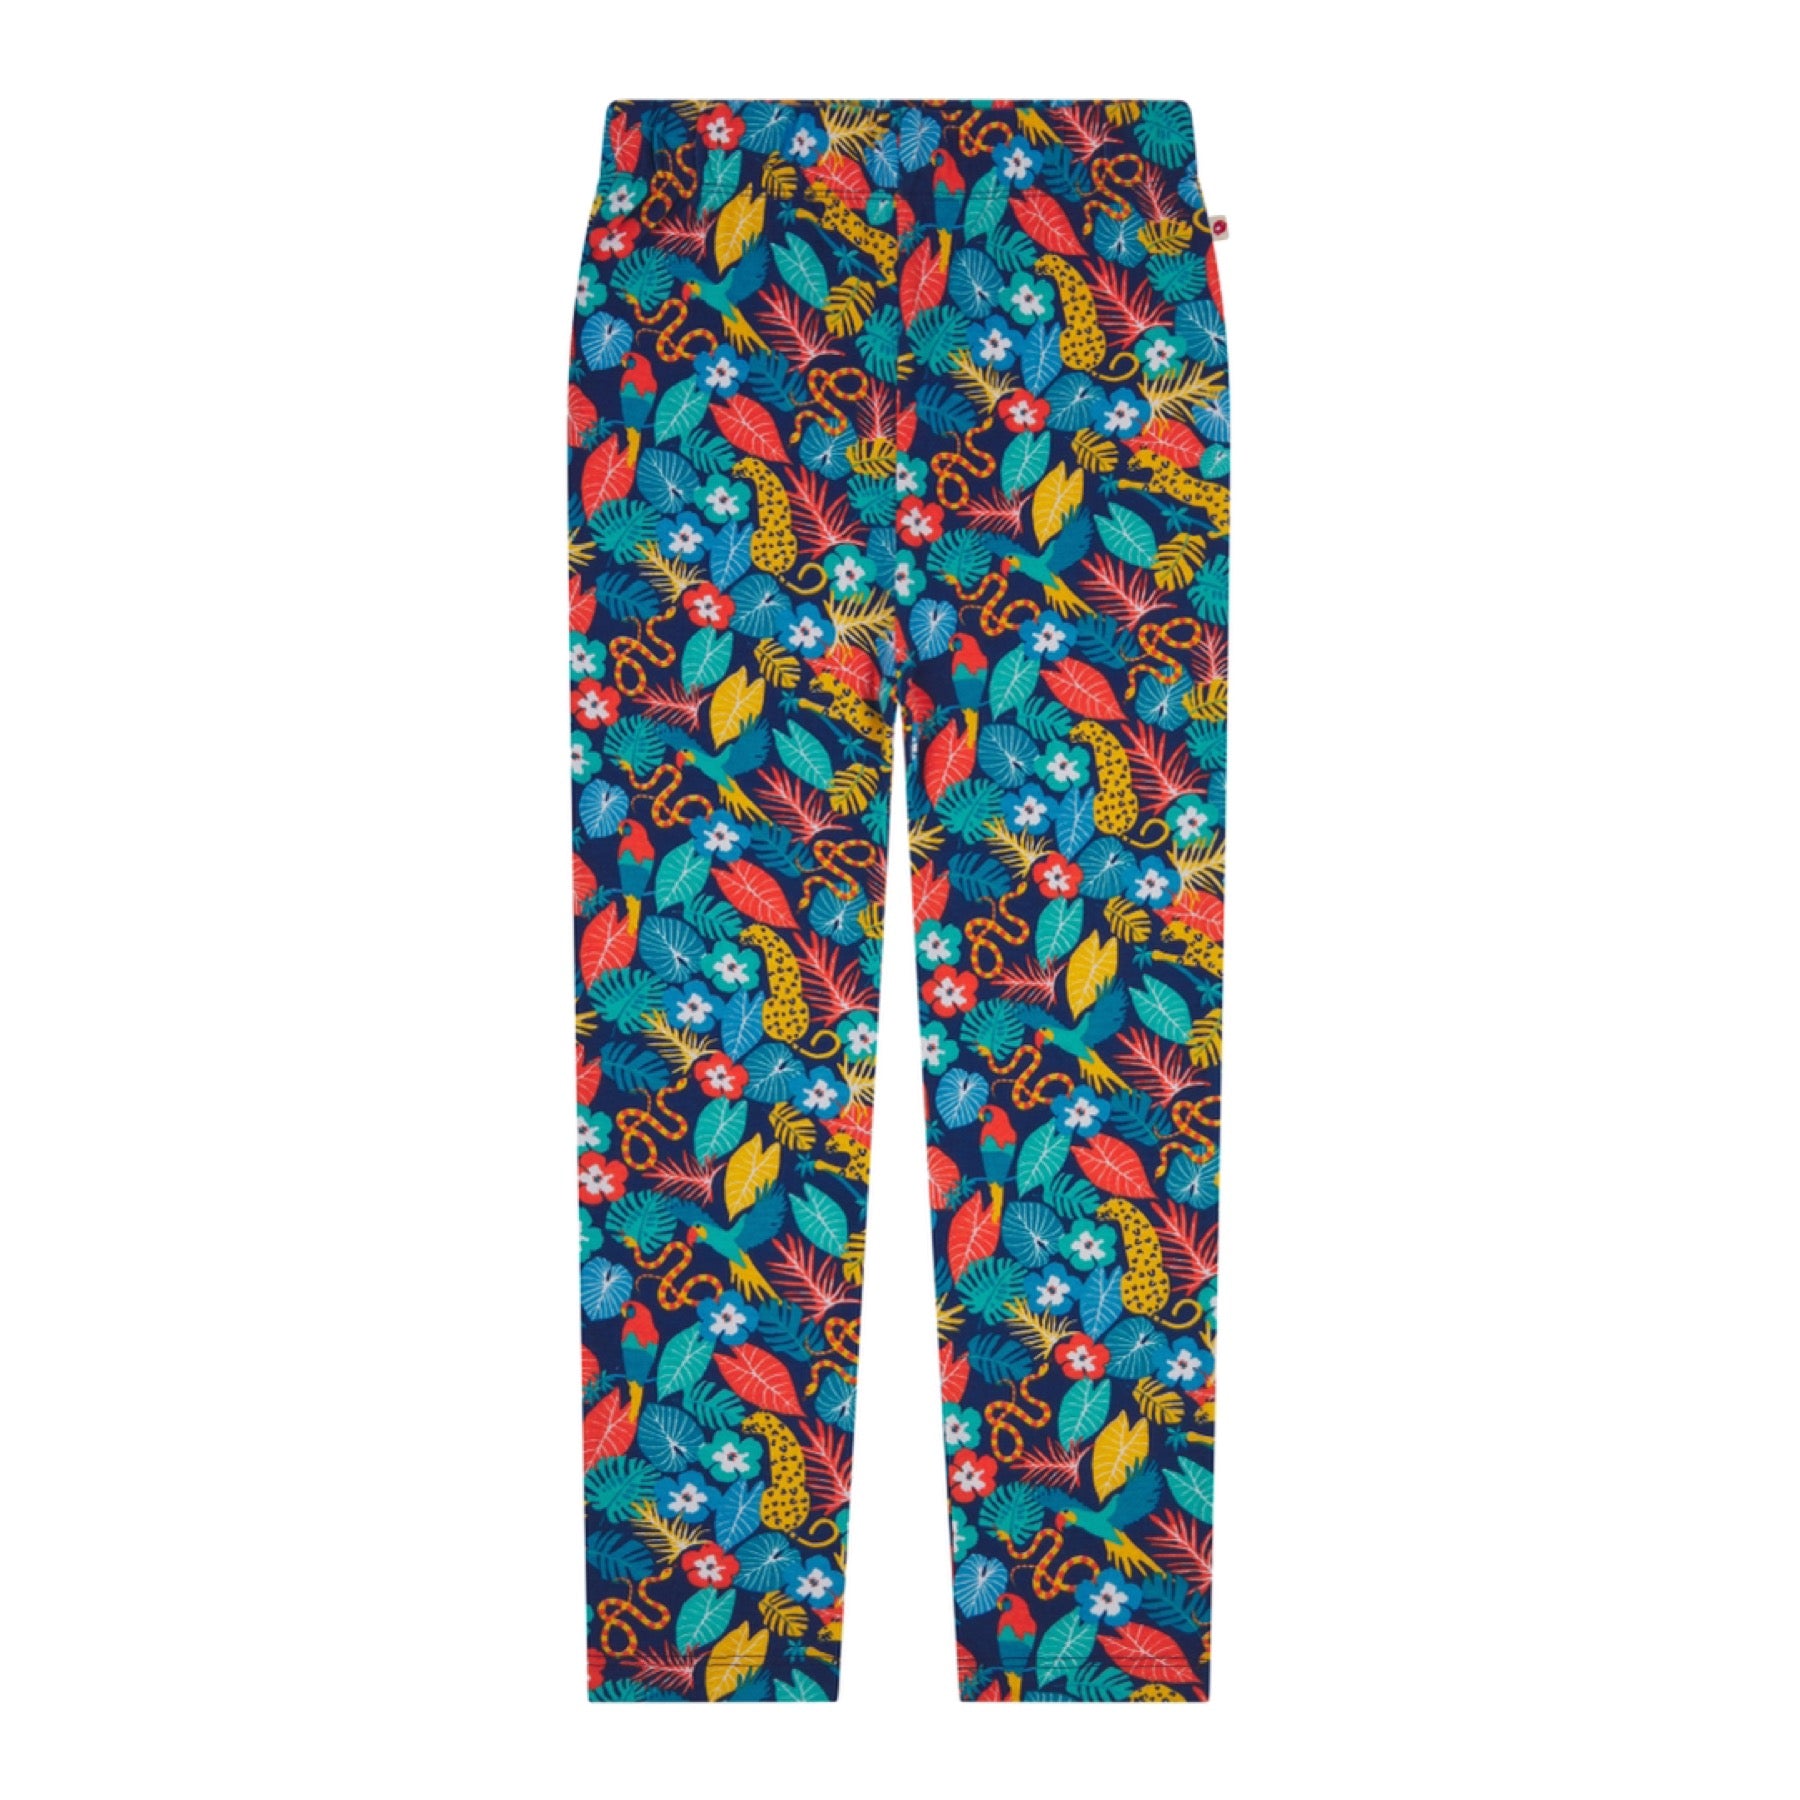 Piccalilly Leggings Tropic